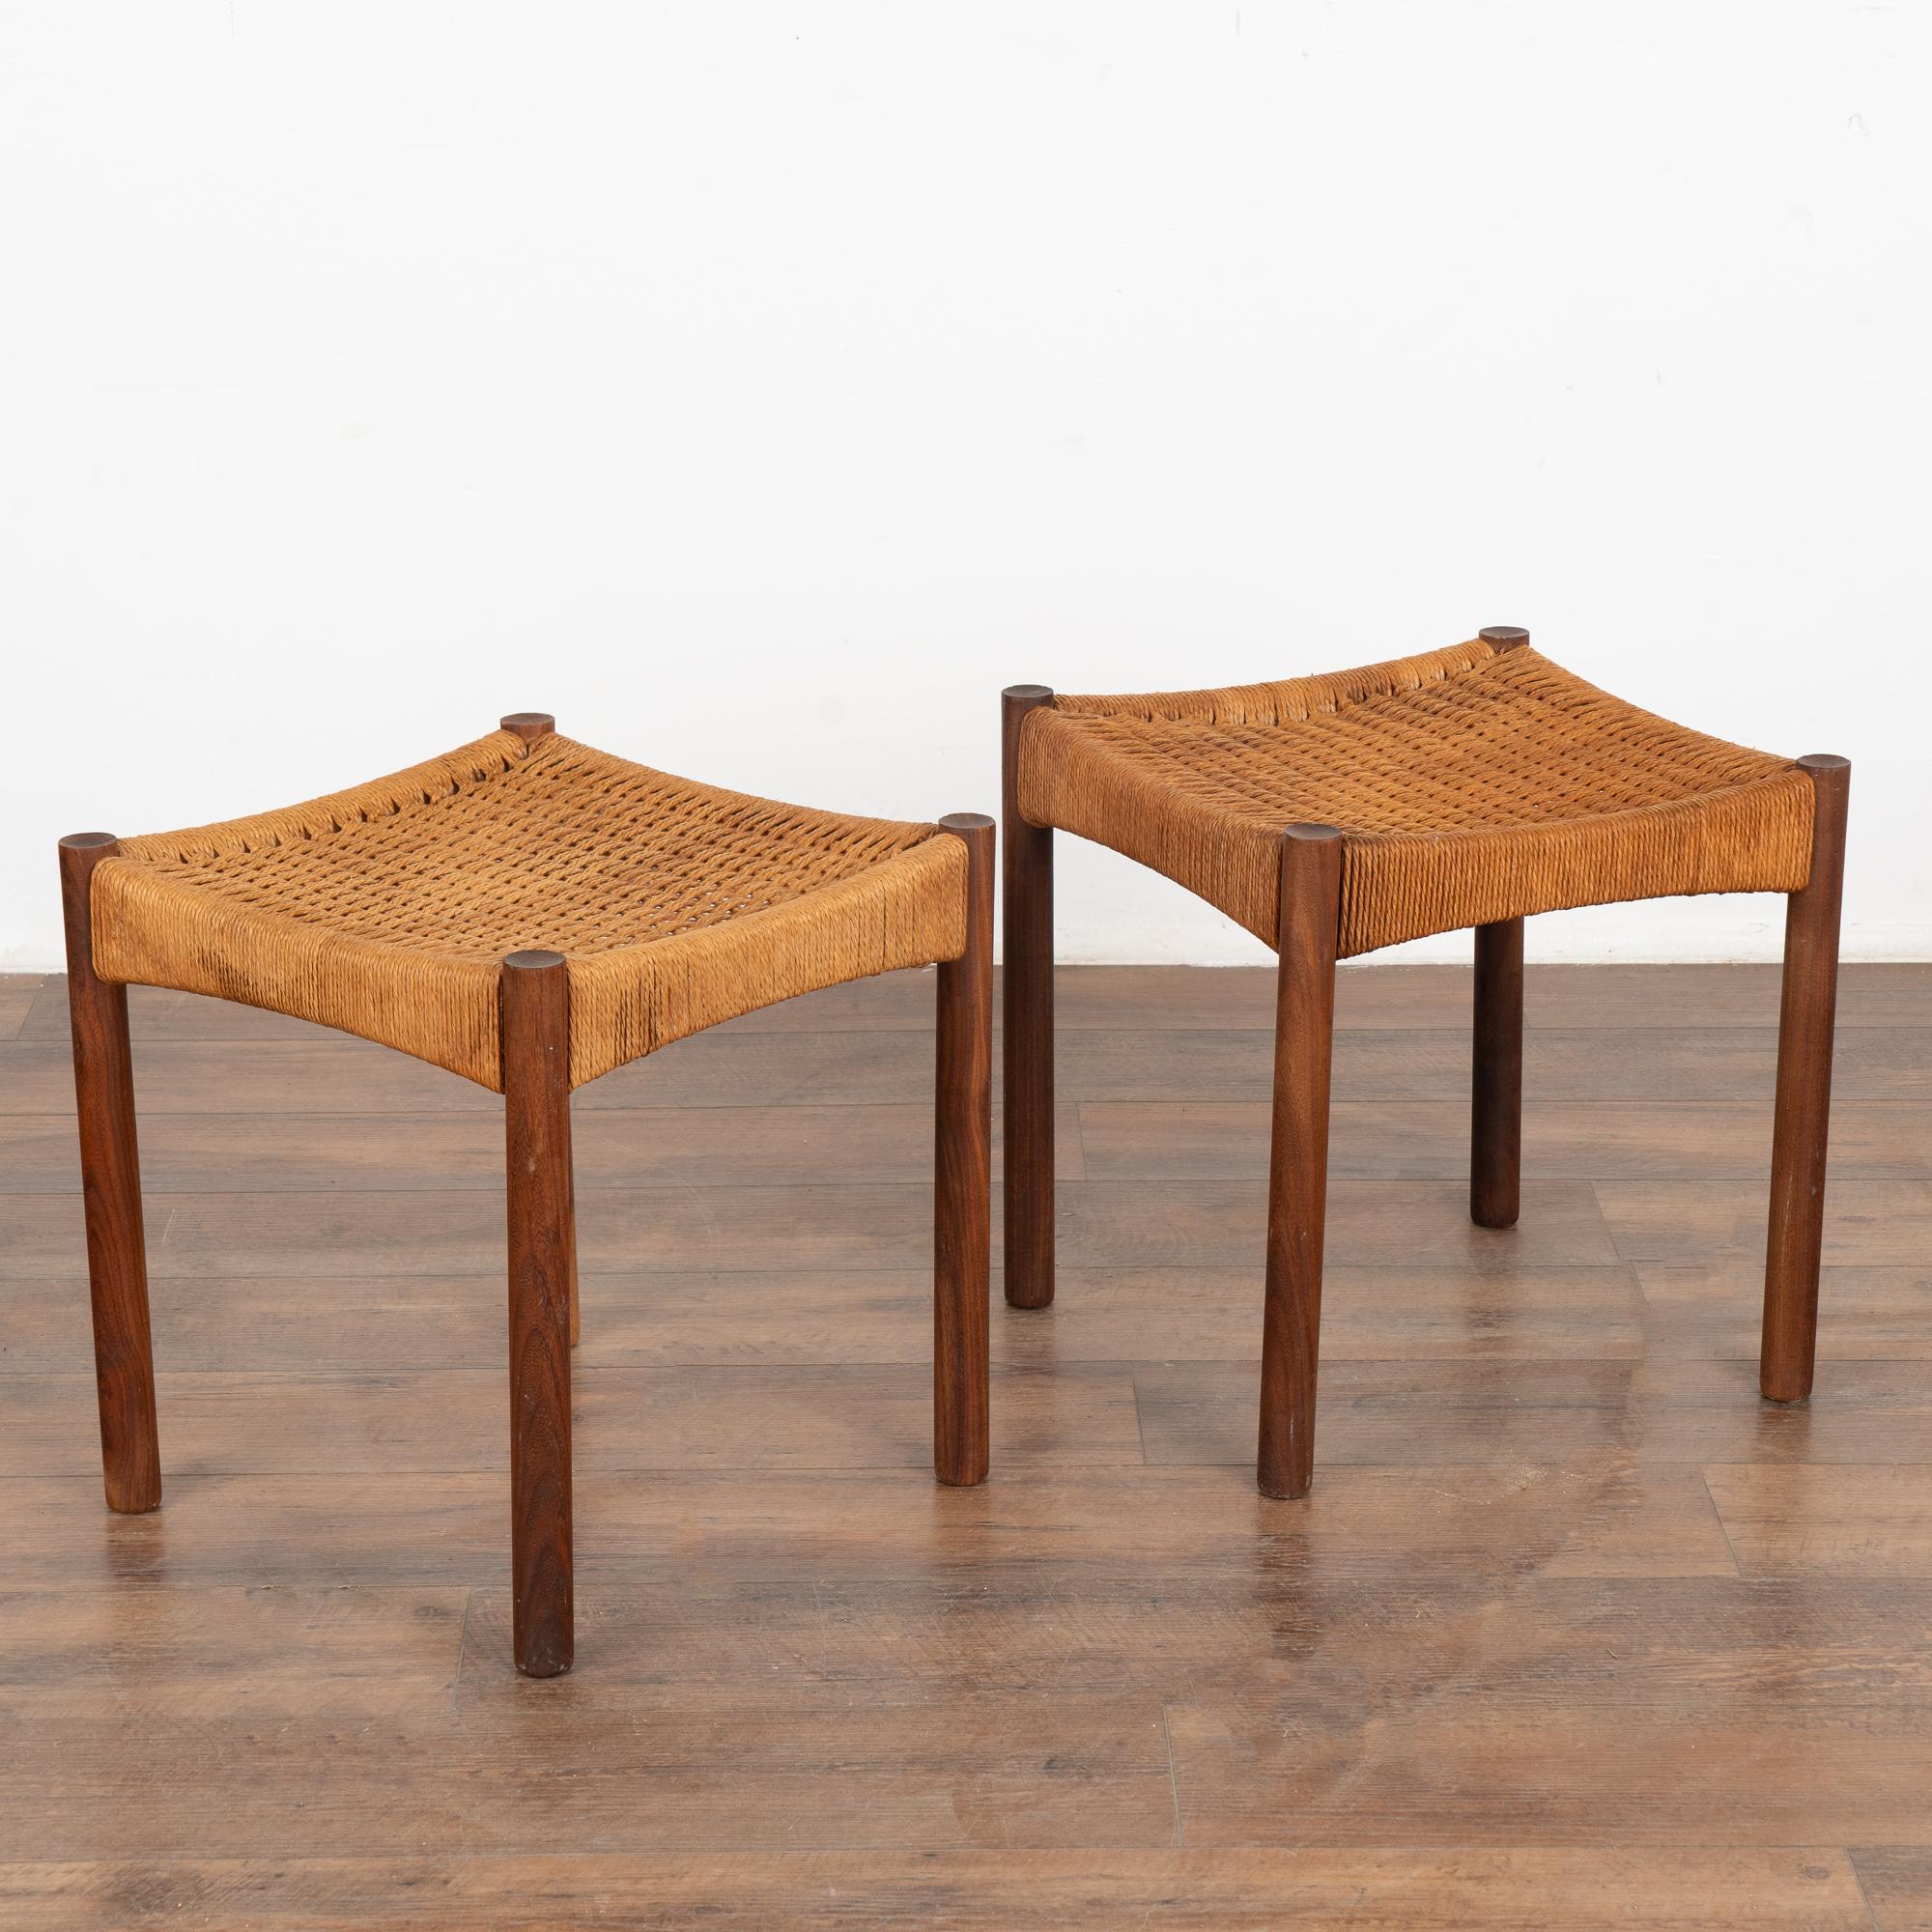 Stylish pair of Mid-Century Modern stools in hand-woven cord or rope with teak wood frame with traditional clean lines. 
This versatile and attractive pair of stools is solid, stable and ready for use. 
In original condition with wear consistent